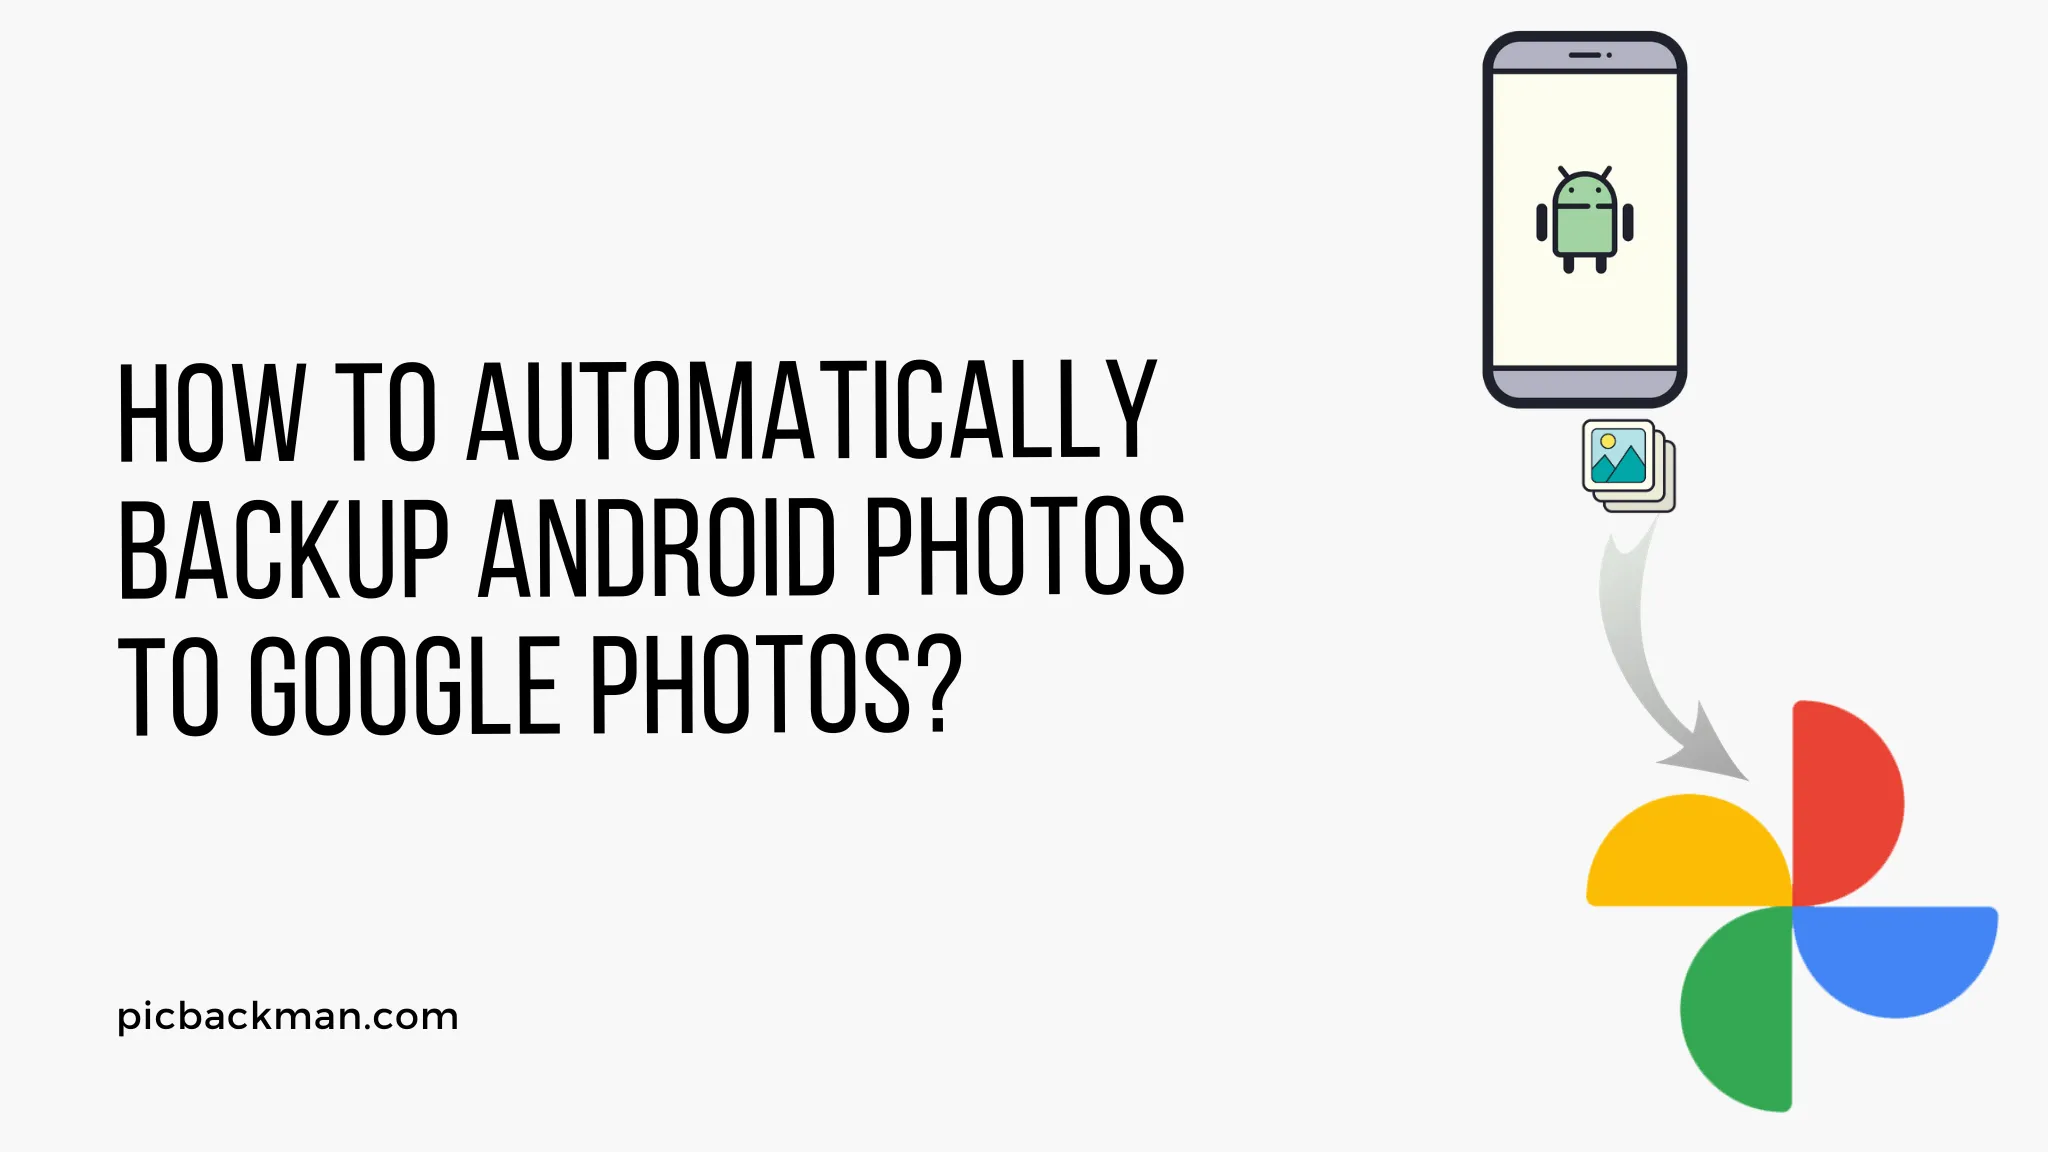 How to Automatically Backup Android Photos to Google Photos?